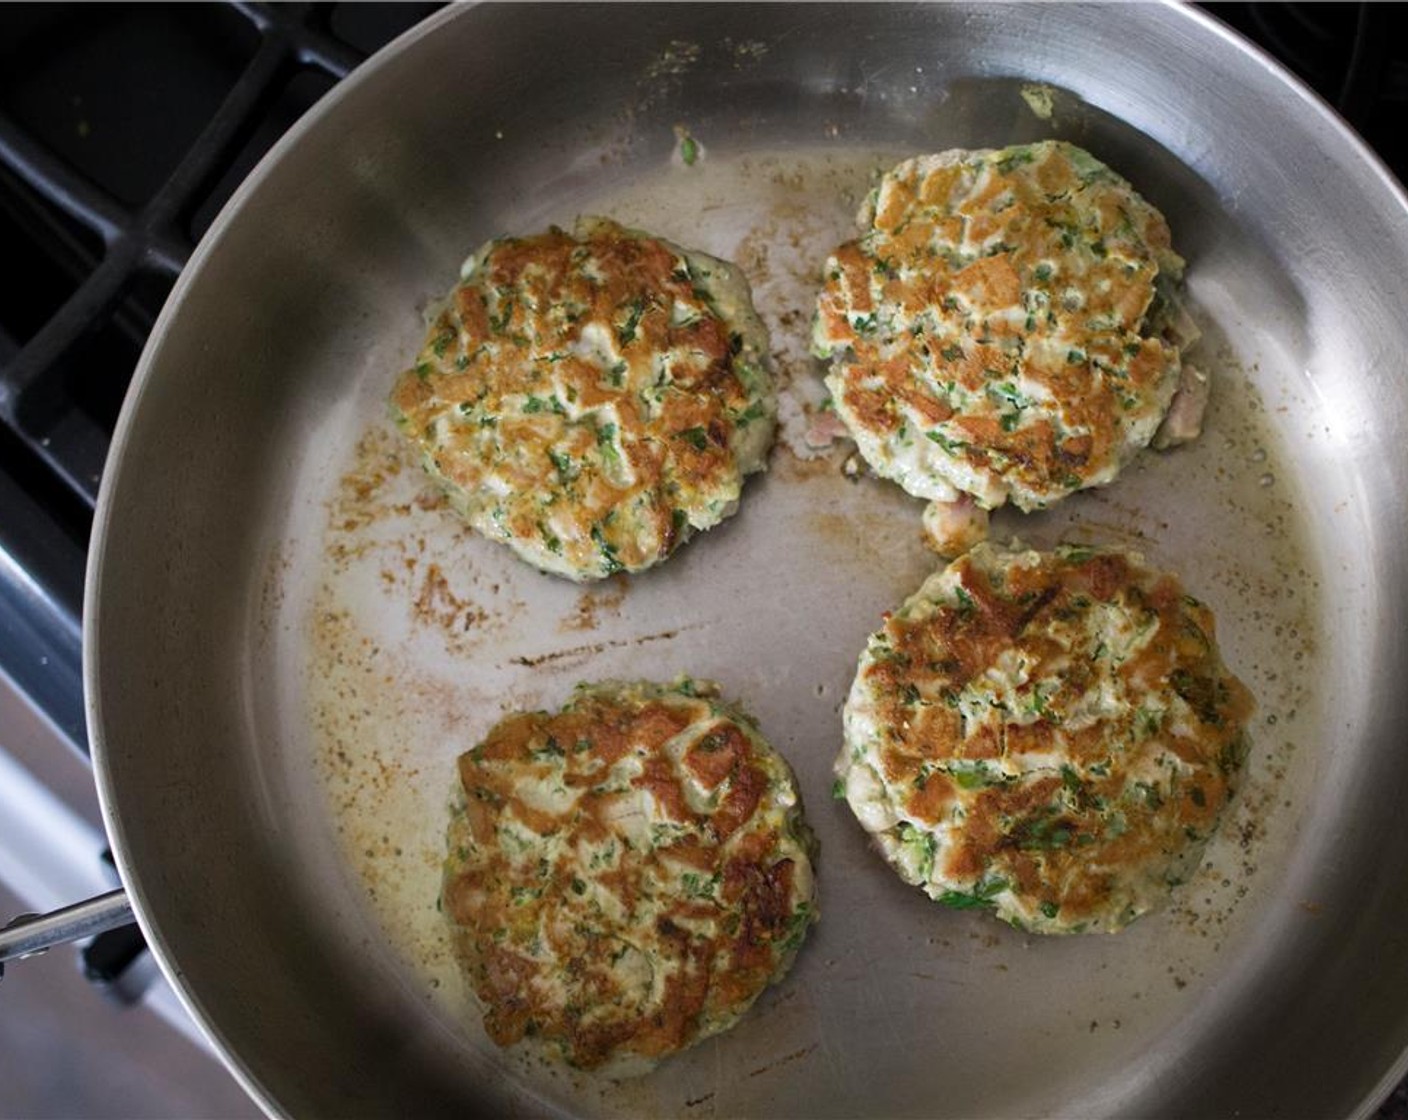 step 7 Heat the Extra-Virgin Olive Oil (2 Tbsp) in a large skillet over medium-high heat.  Cook the tuna burgers, 2-3 minutes per side –  don’t overcook the burgers or they will be dry.  Transfer to a clean plate to rest.